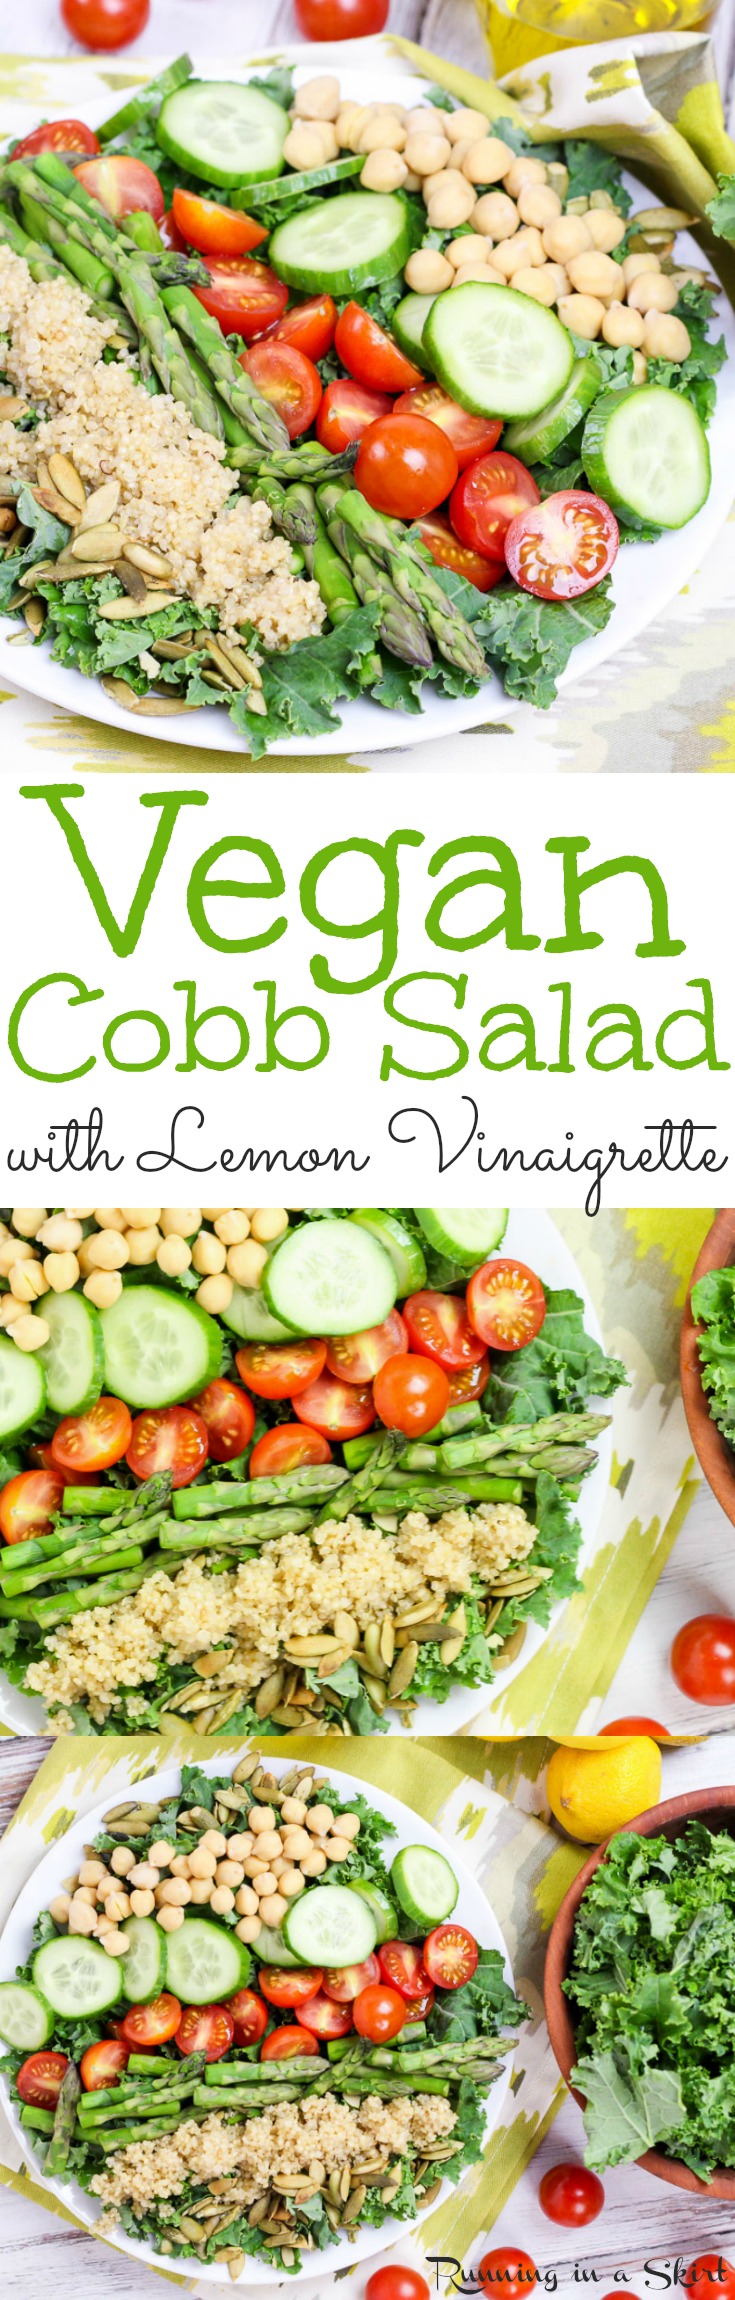 Healthy Vegan Cobb Salad recipe with Lemon Dressing- inspired by the Cheesecake Factory.  A high protein, clean eating lunch or dinners... packed with veggies. Includes the dressing recipe. Gluten free, Dairy Free & Whole 30. / Running in a Skirt via @juliewunder